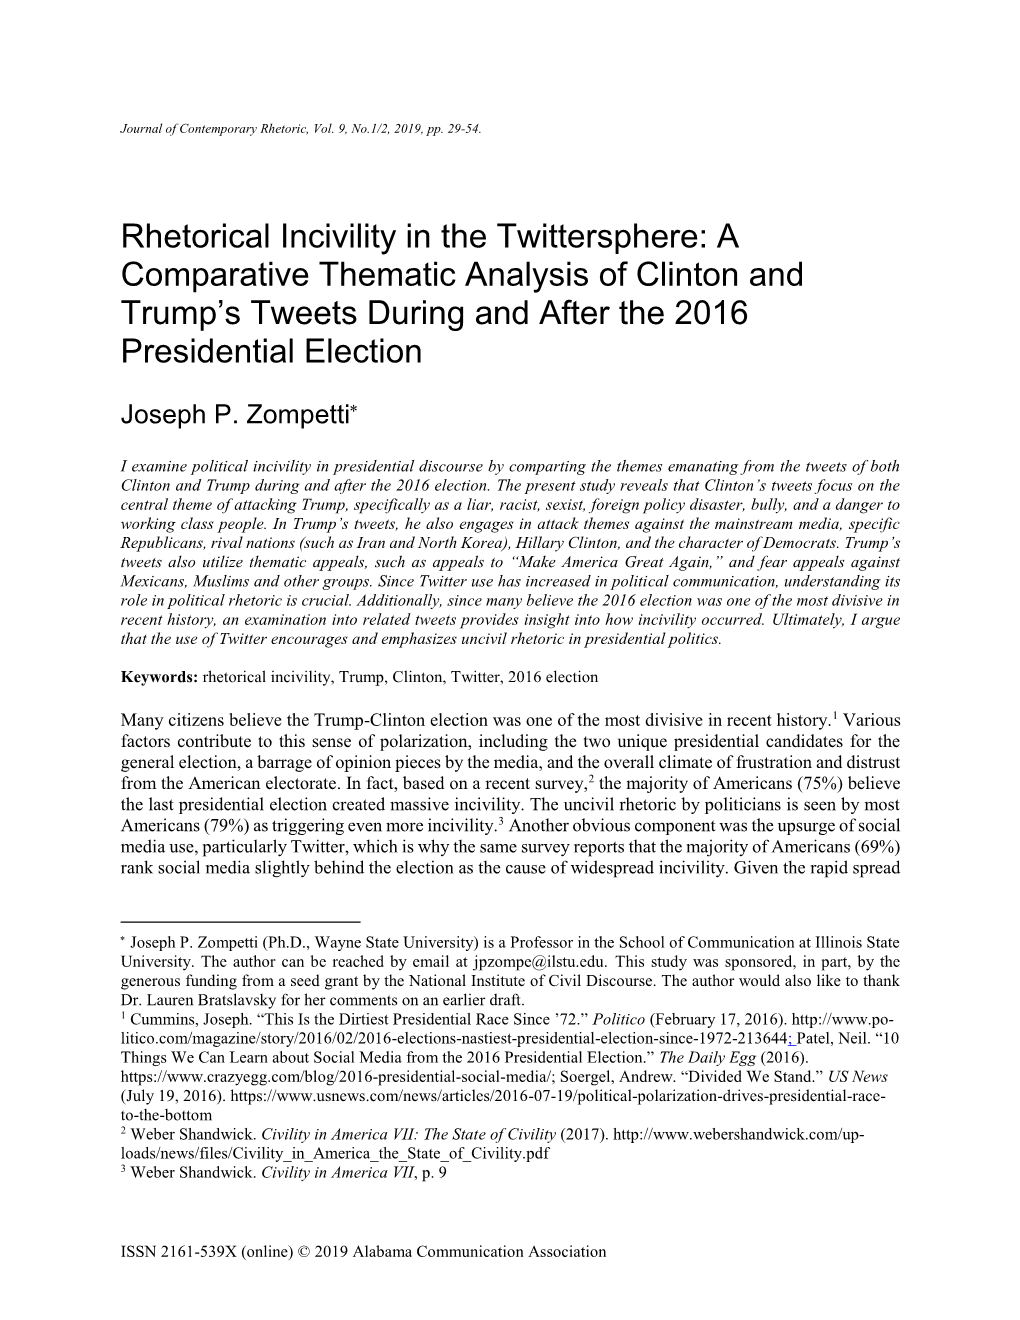 Rhetorical Incivility in the Twittersphere: a Comparative Thematic Analysis of Clinton and Trump’S Tweets During and After the 2016 Presidential Election